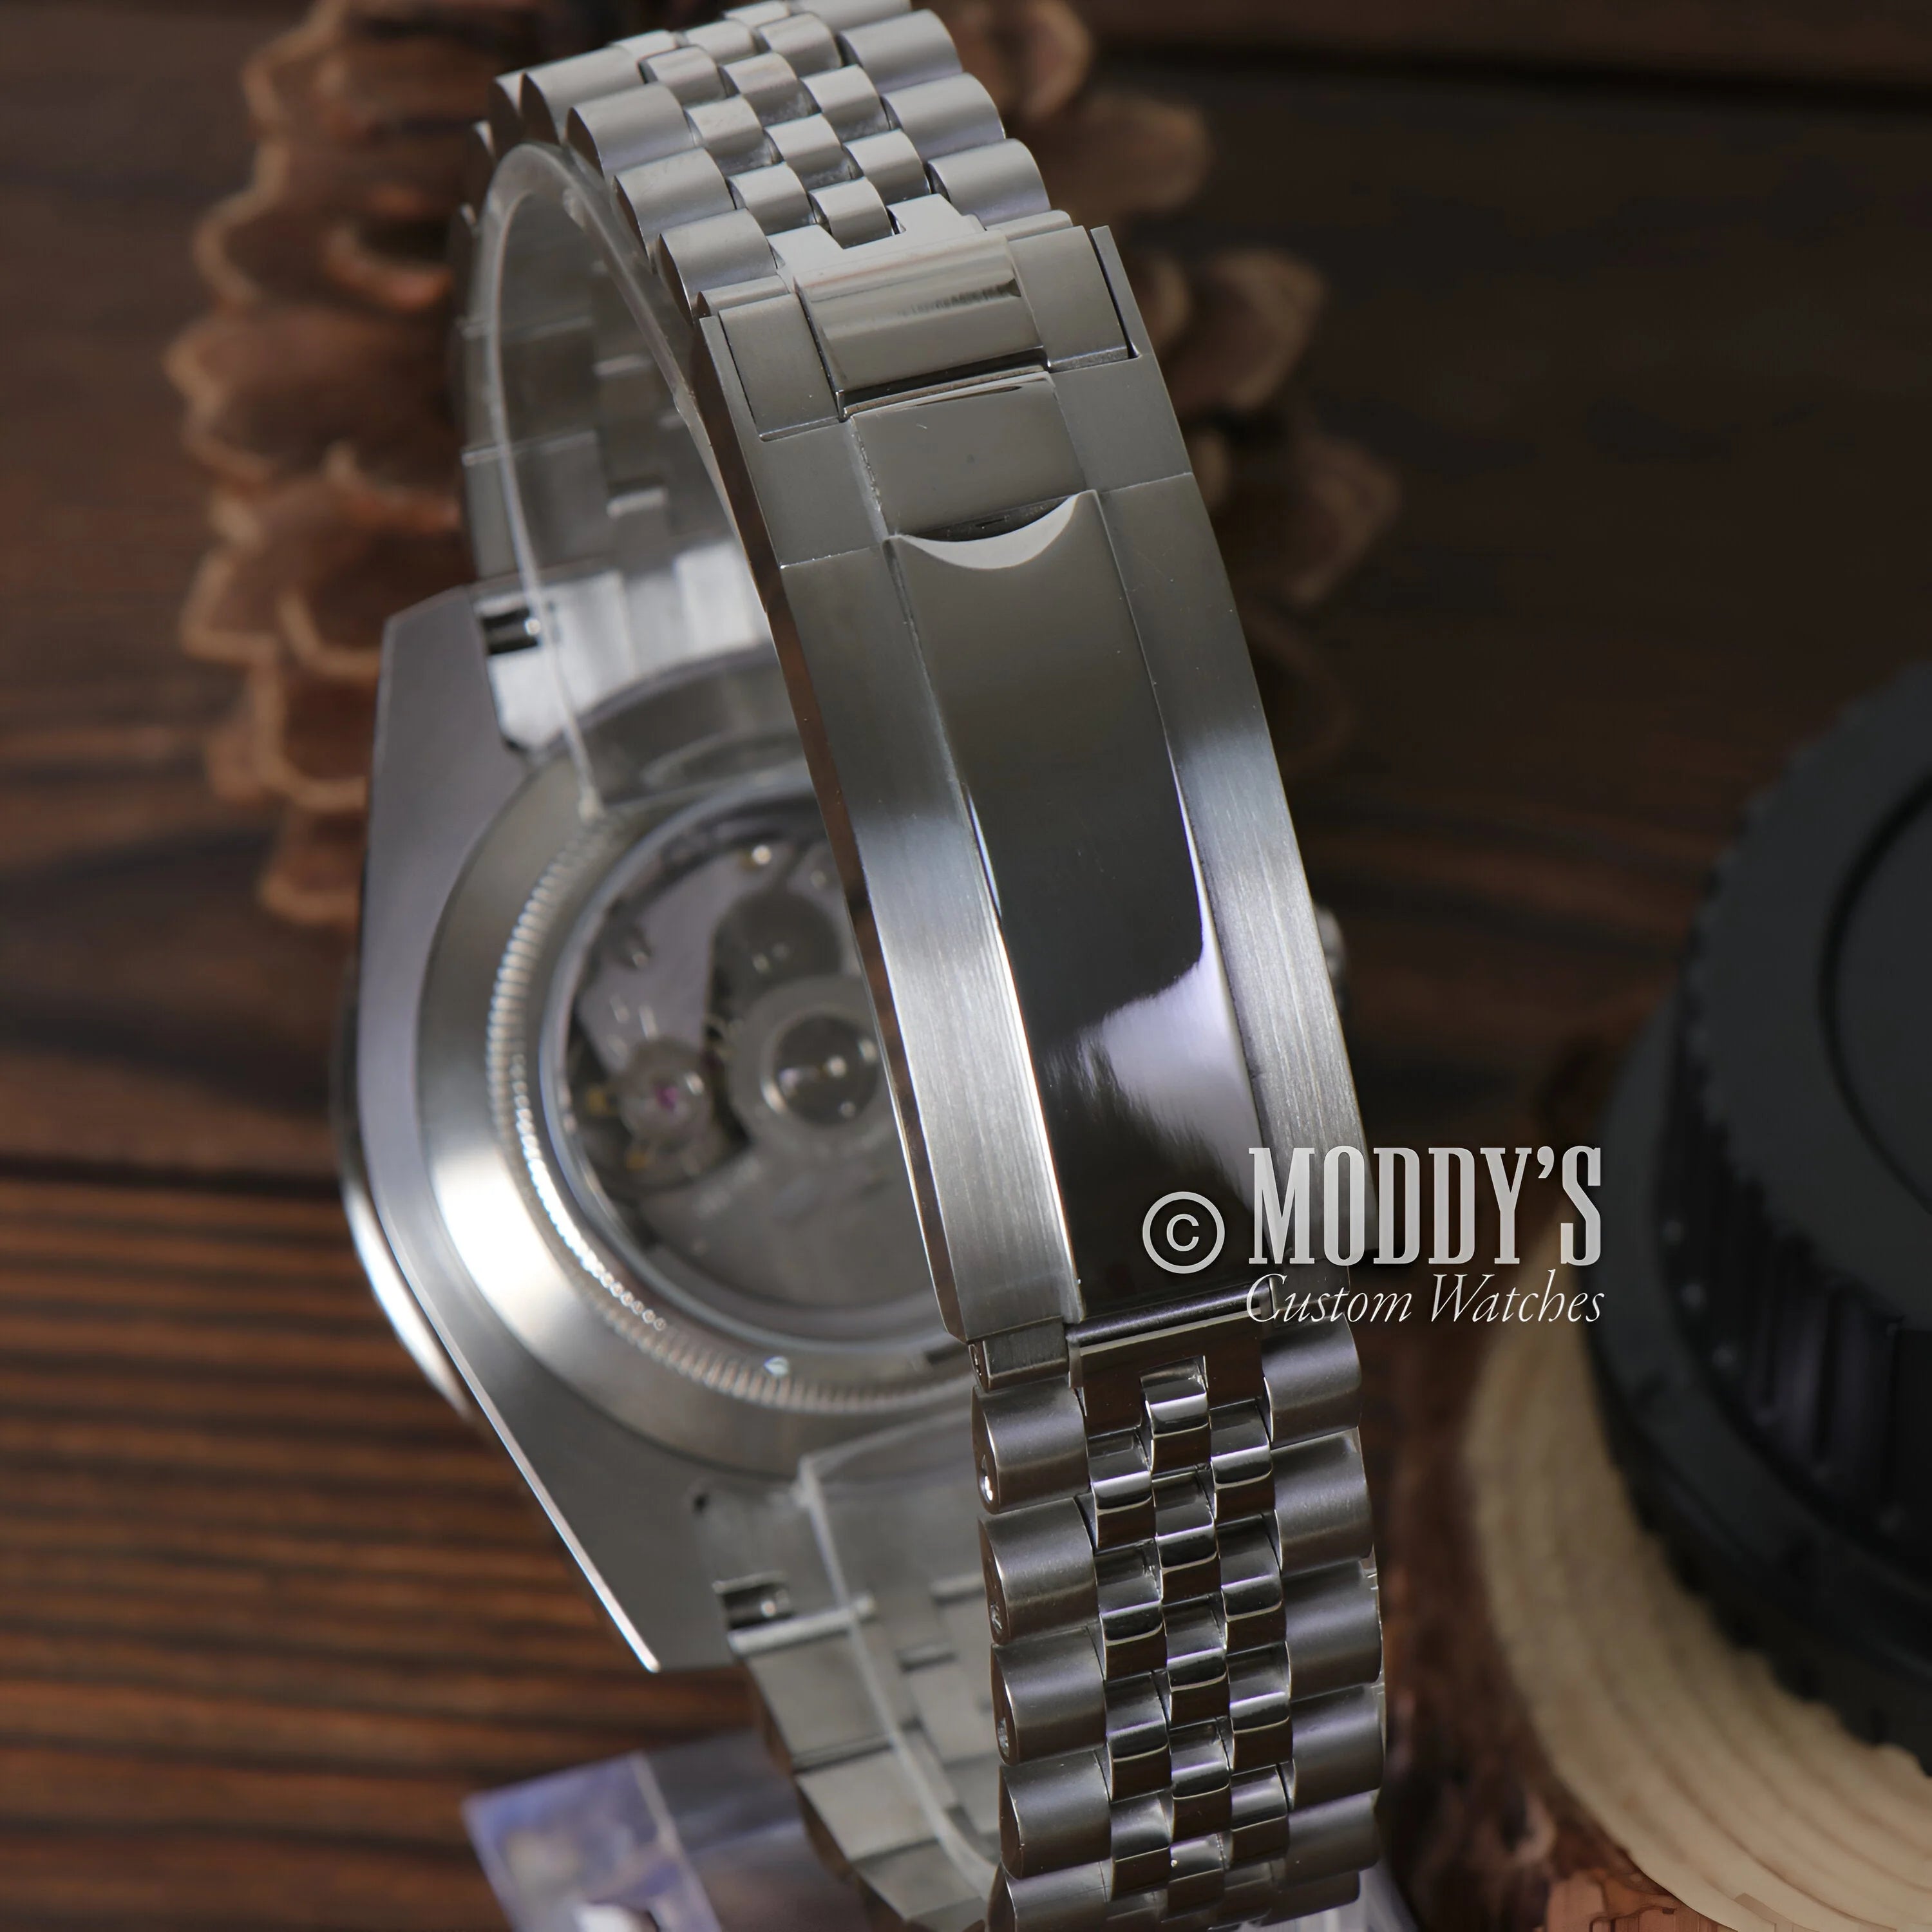 Stainless Steel Gmteiko Pepsi Watch With Visible Mechanical Movement Through The Case Back